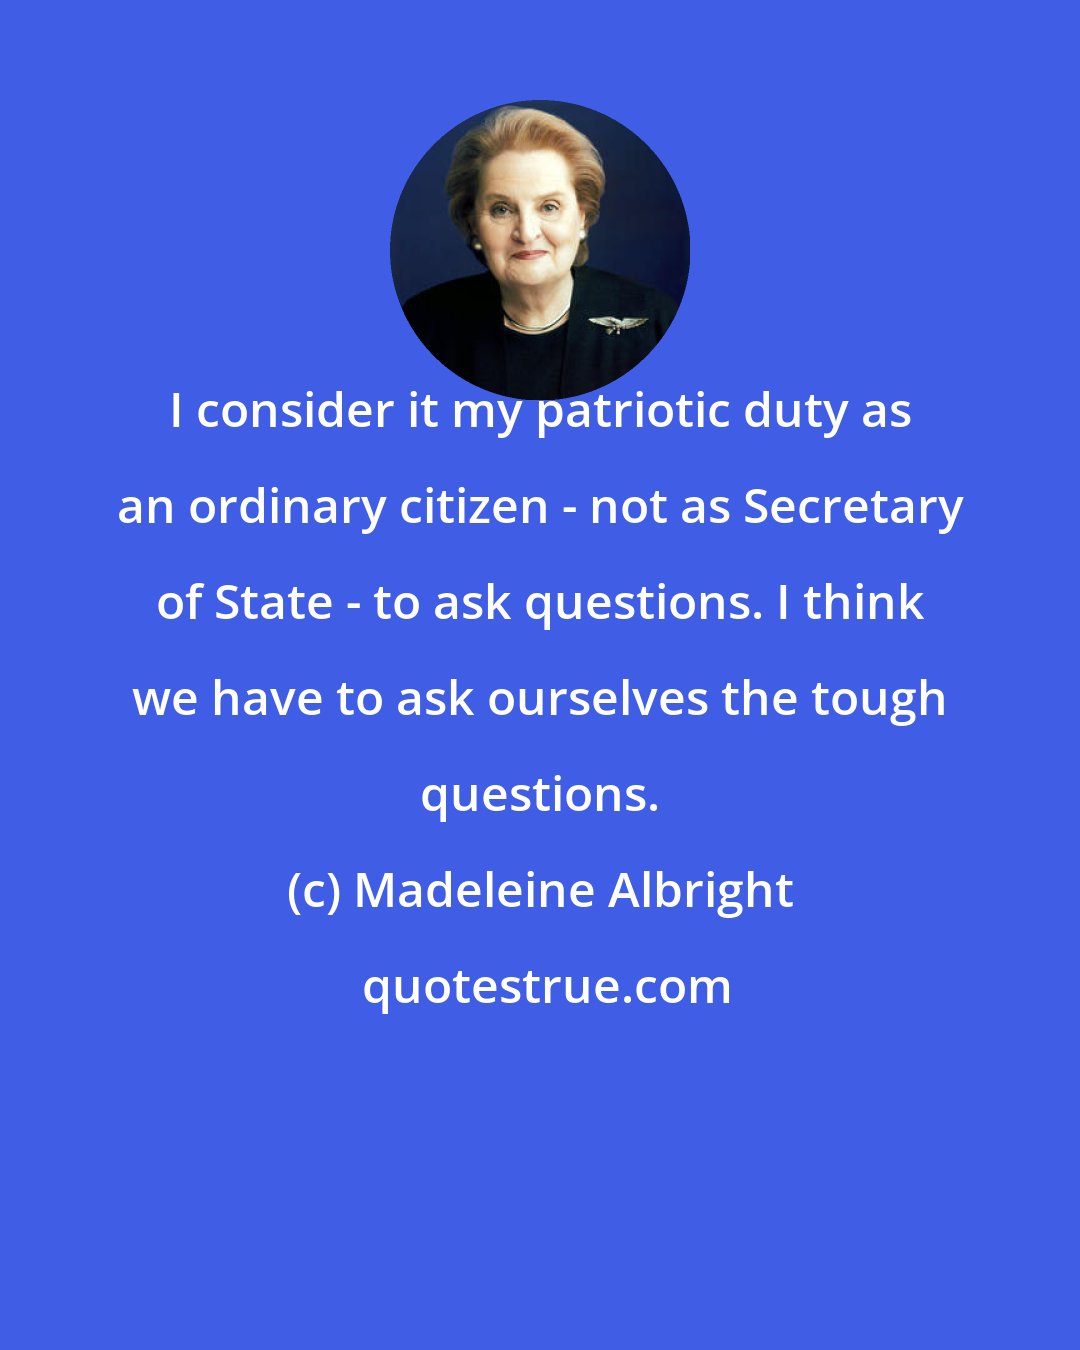 Madeleine Albright: I consider it my patriotic duty as an ordinary citizen - not as Secretary of State - to ask questions. I think we have to ask ourselves the tough questions.